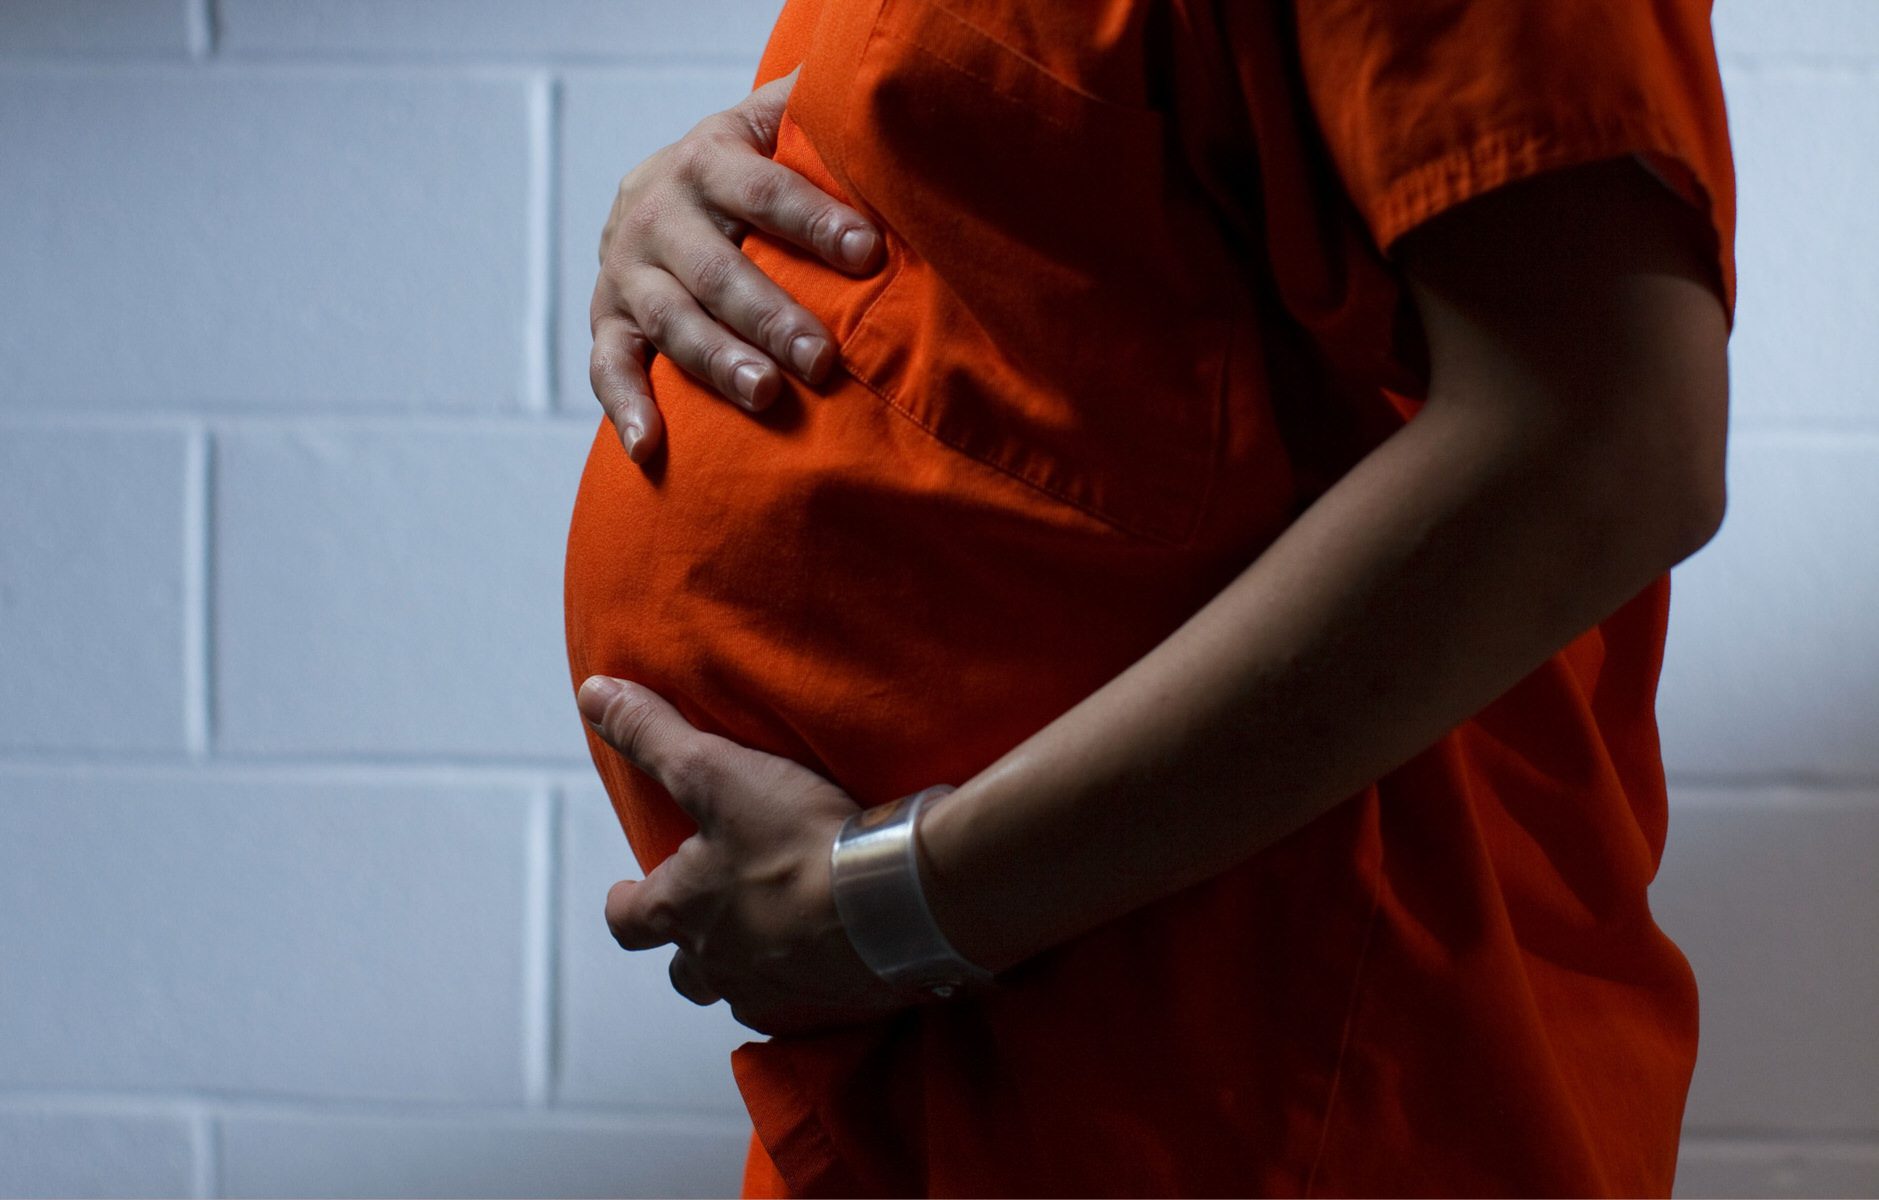 Bill aims to improve care of pregnant women, babies in federal prisons picture